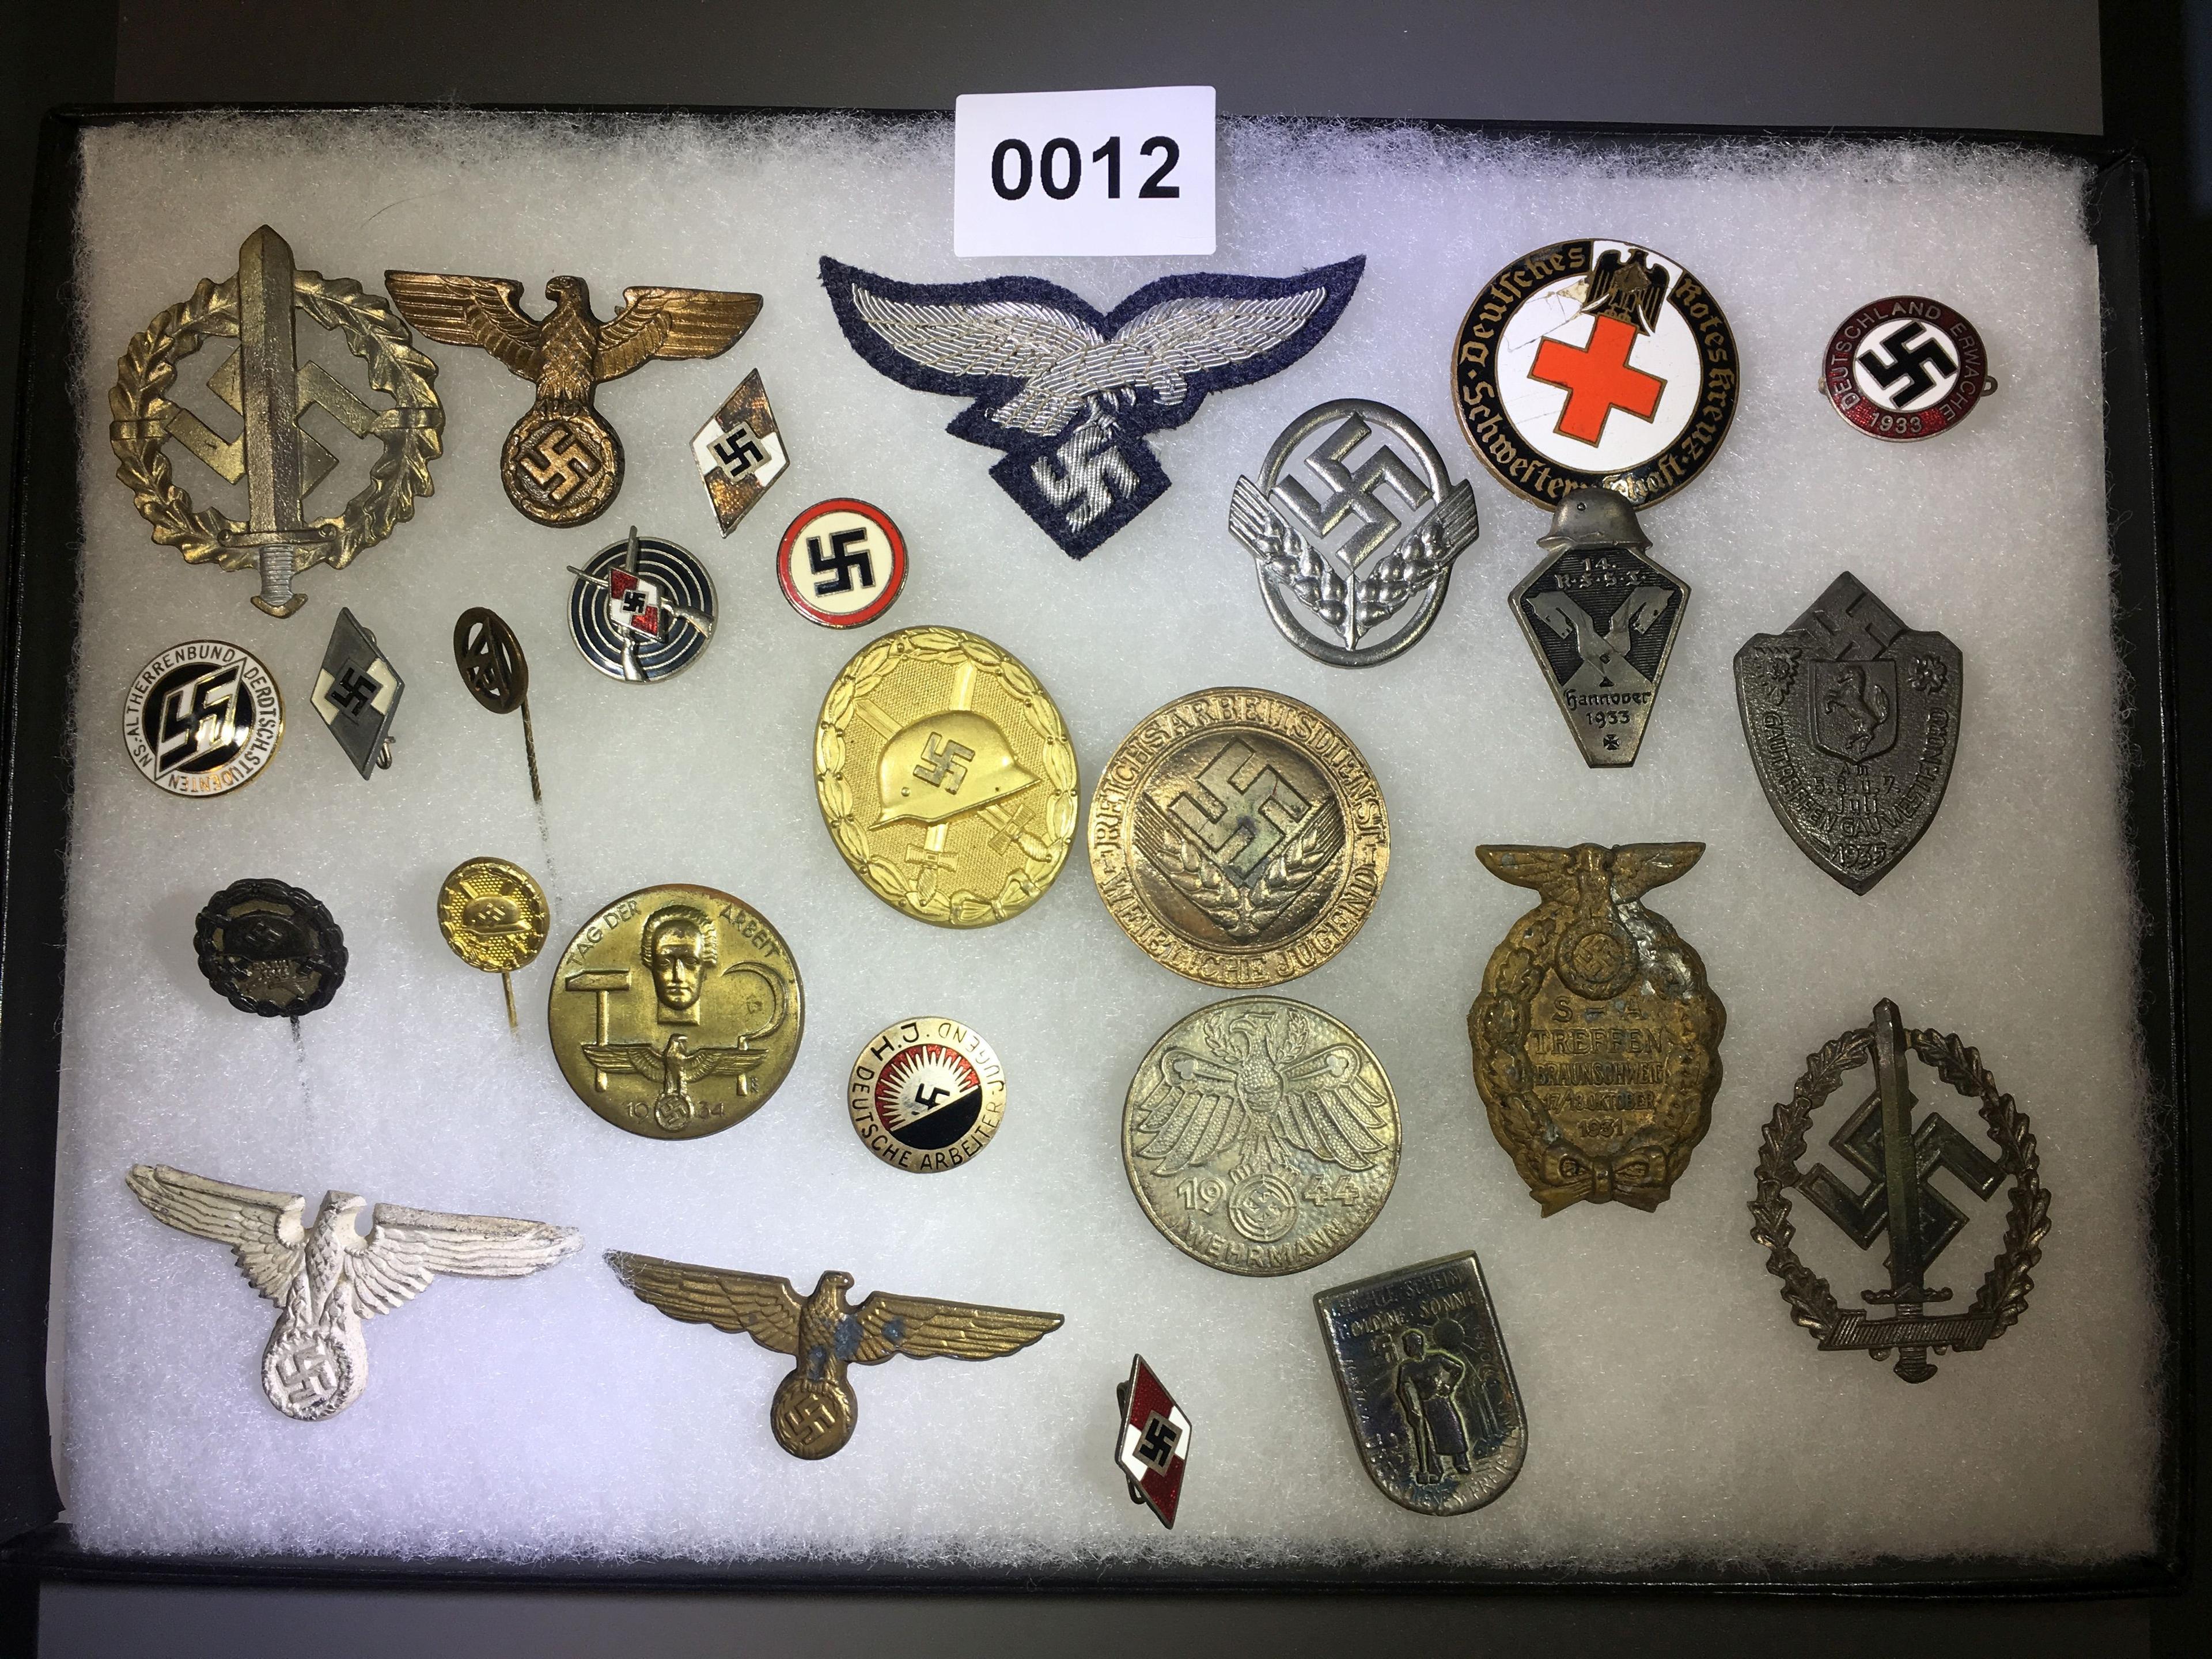 Wound badge and medals and enamel pins. All items in lot photos are included.